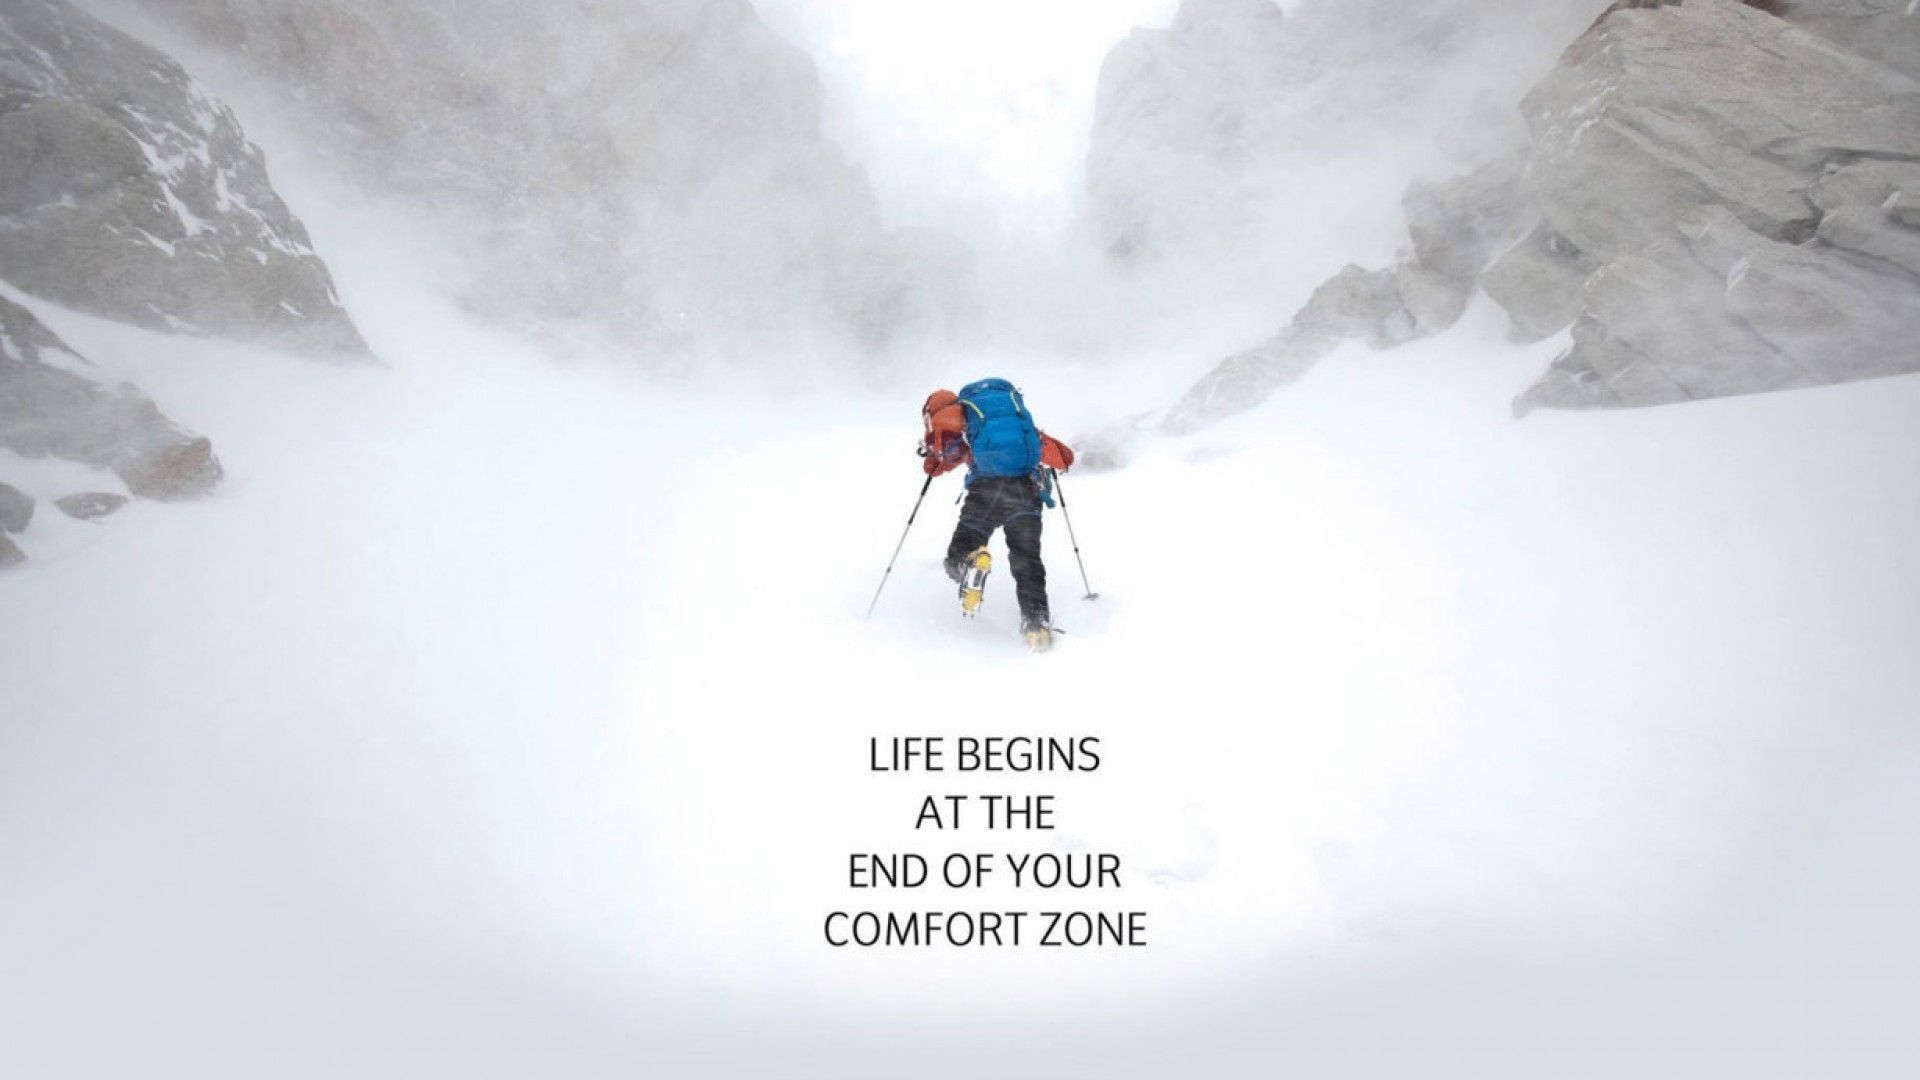 Life Begins at the end of your Comfort zone. HD Motivation Wallpaper for Mobile and Desktop